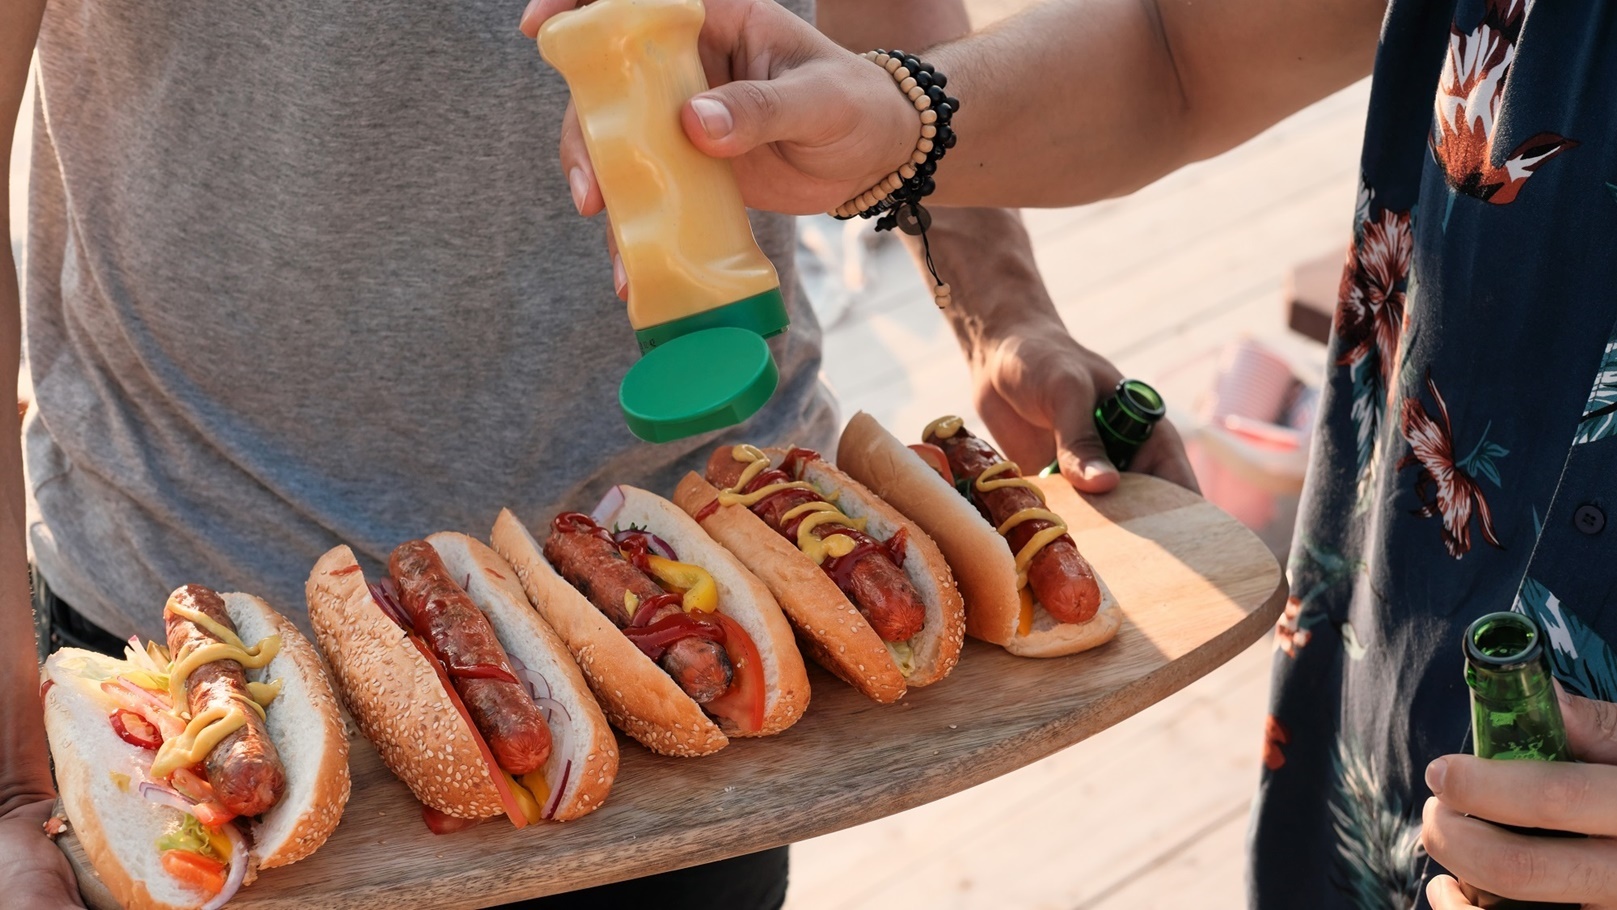 hot-dogs-at-a-party-2021-08-29-00-34-12-utc (1)